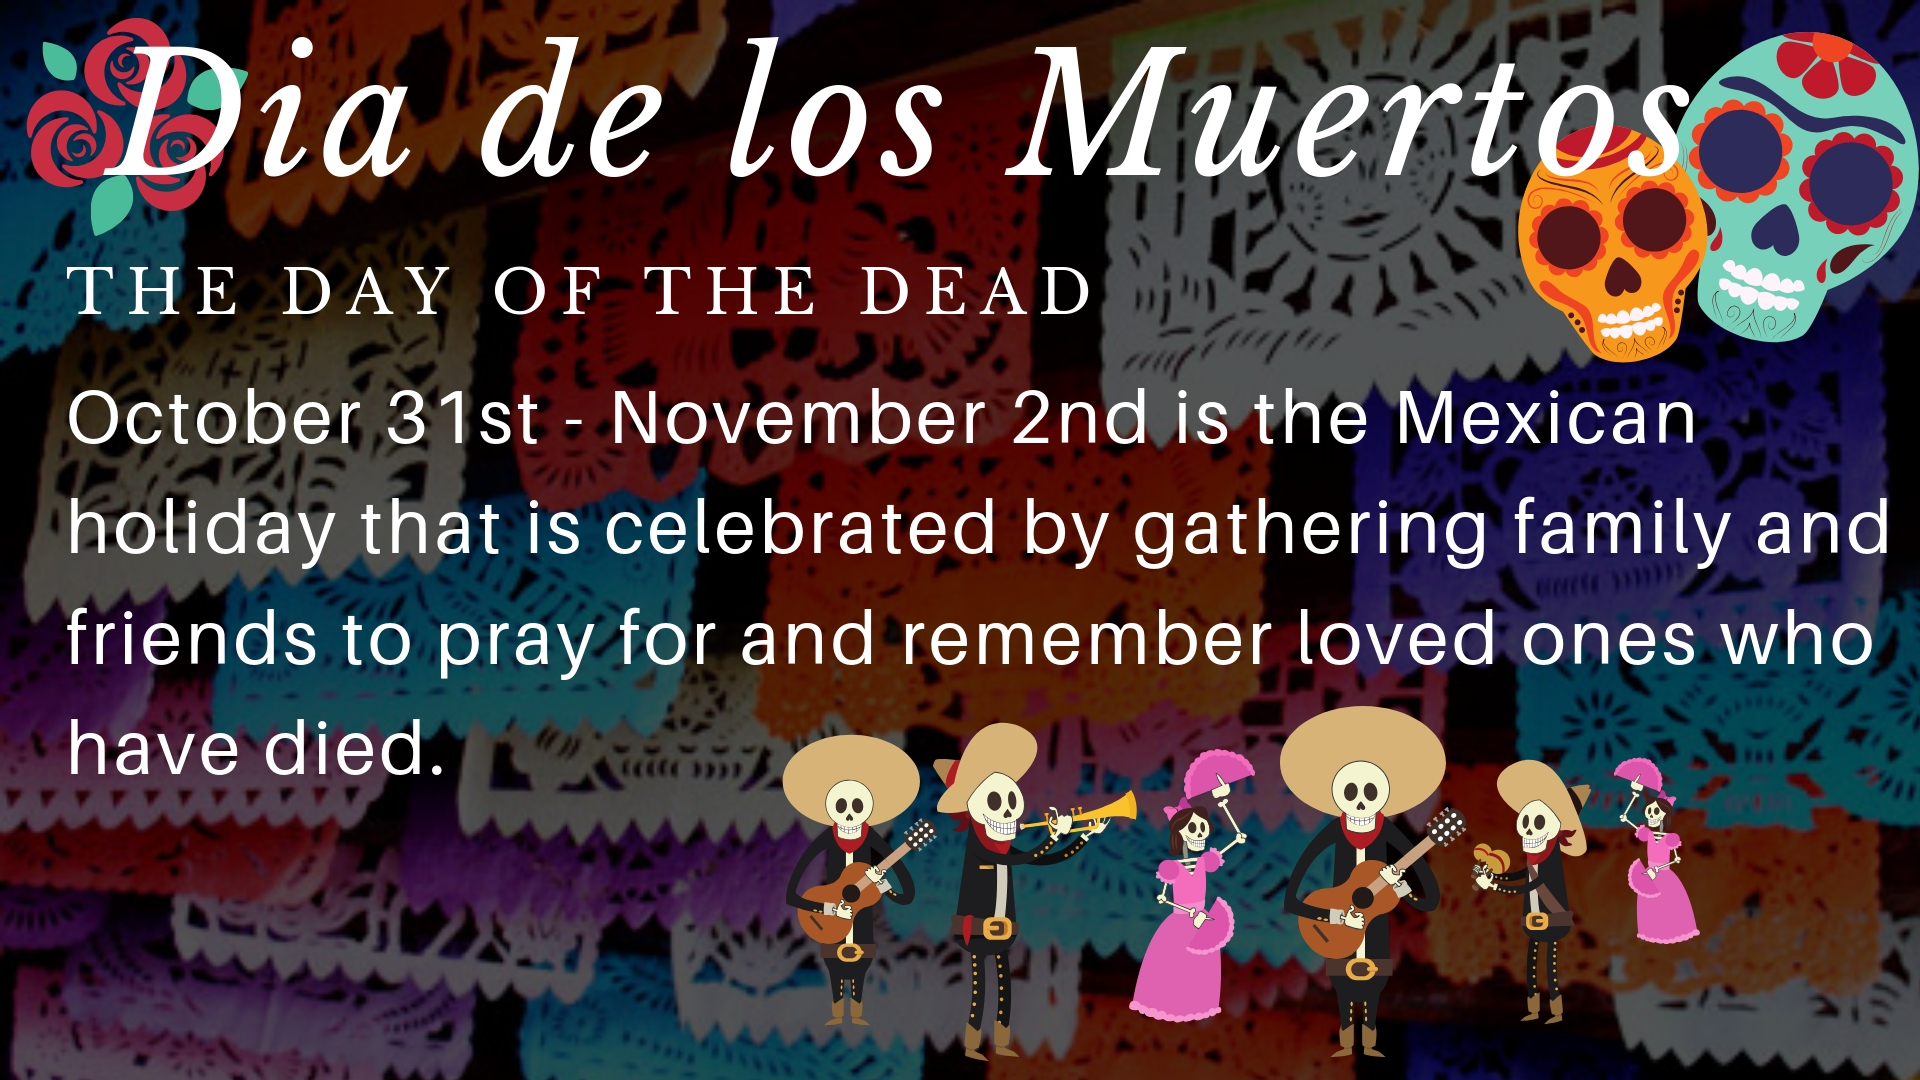 Dia de los muertos the day of the dead. October 31st-November 2nd is the Mexican holiday that is celebrated by gathering family and friends to pray for and remember loved ones who have died.